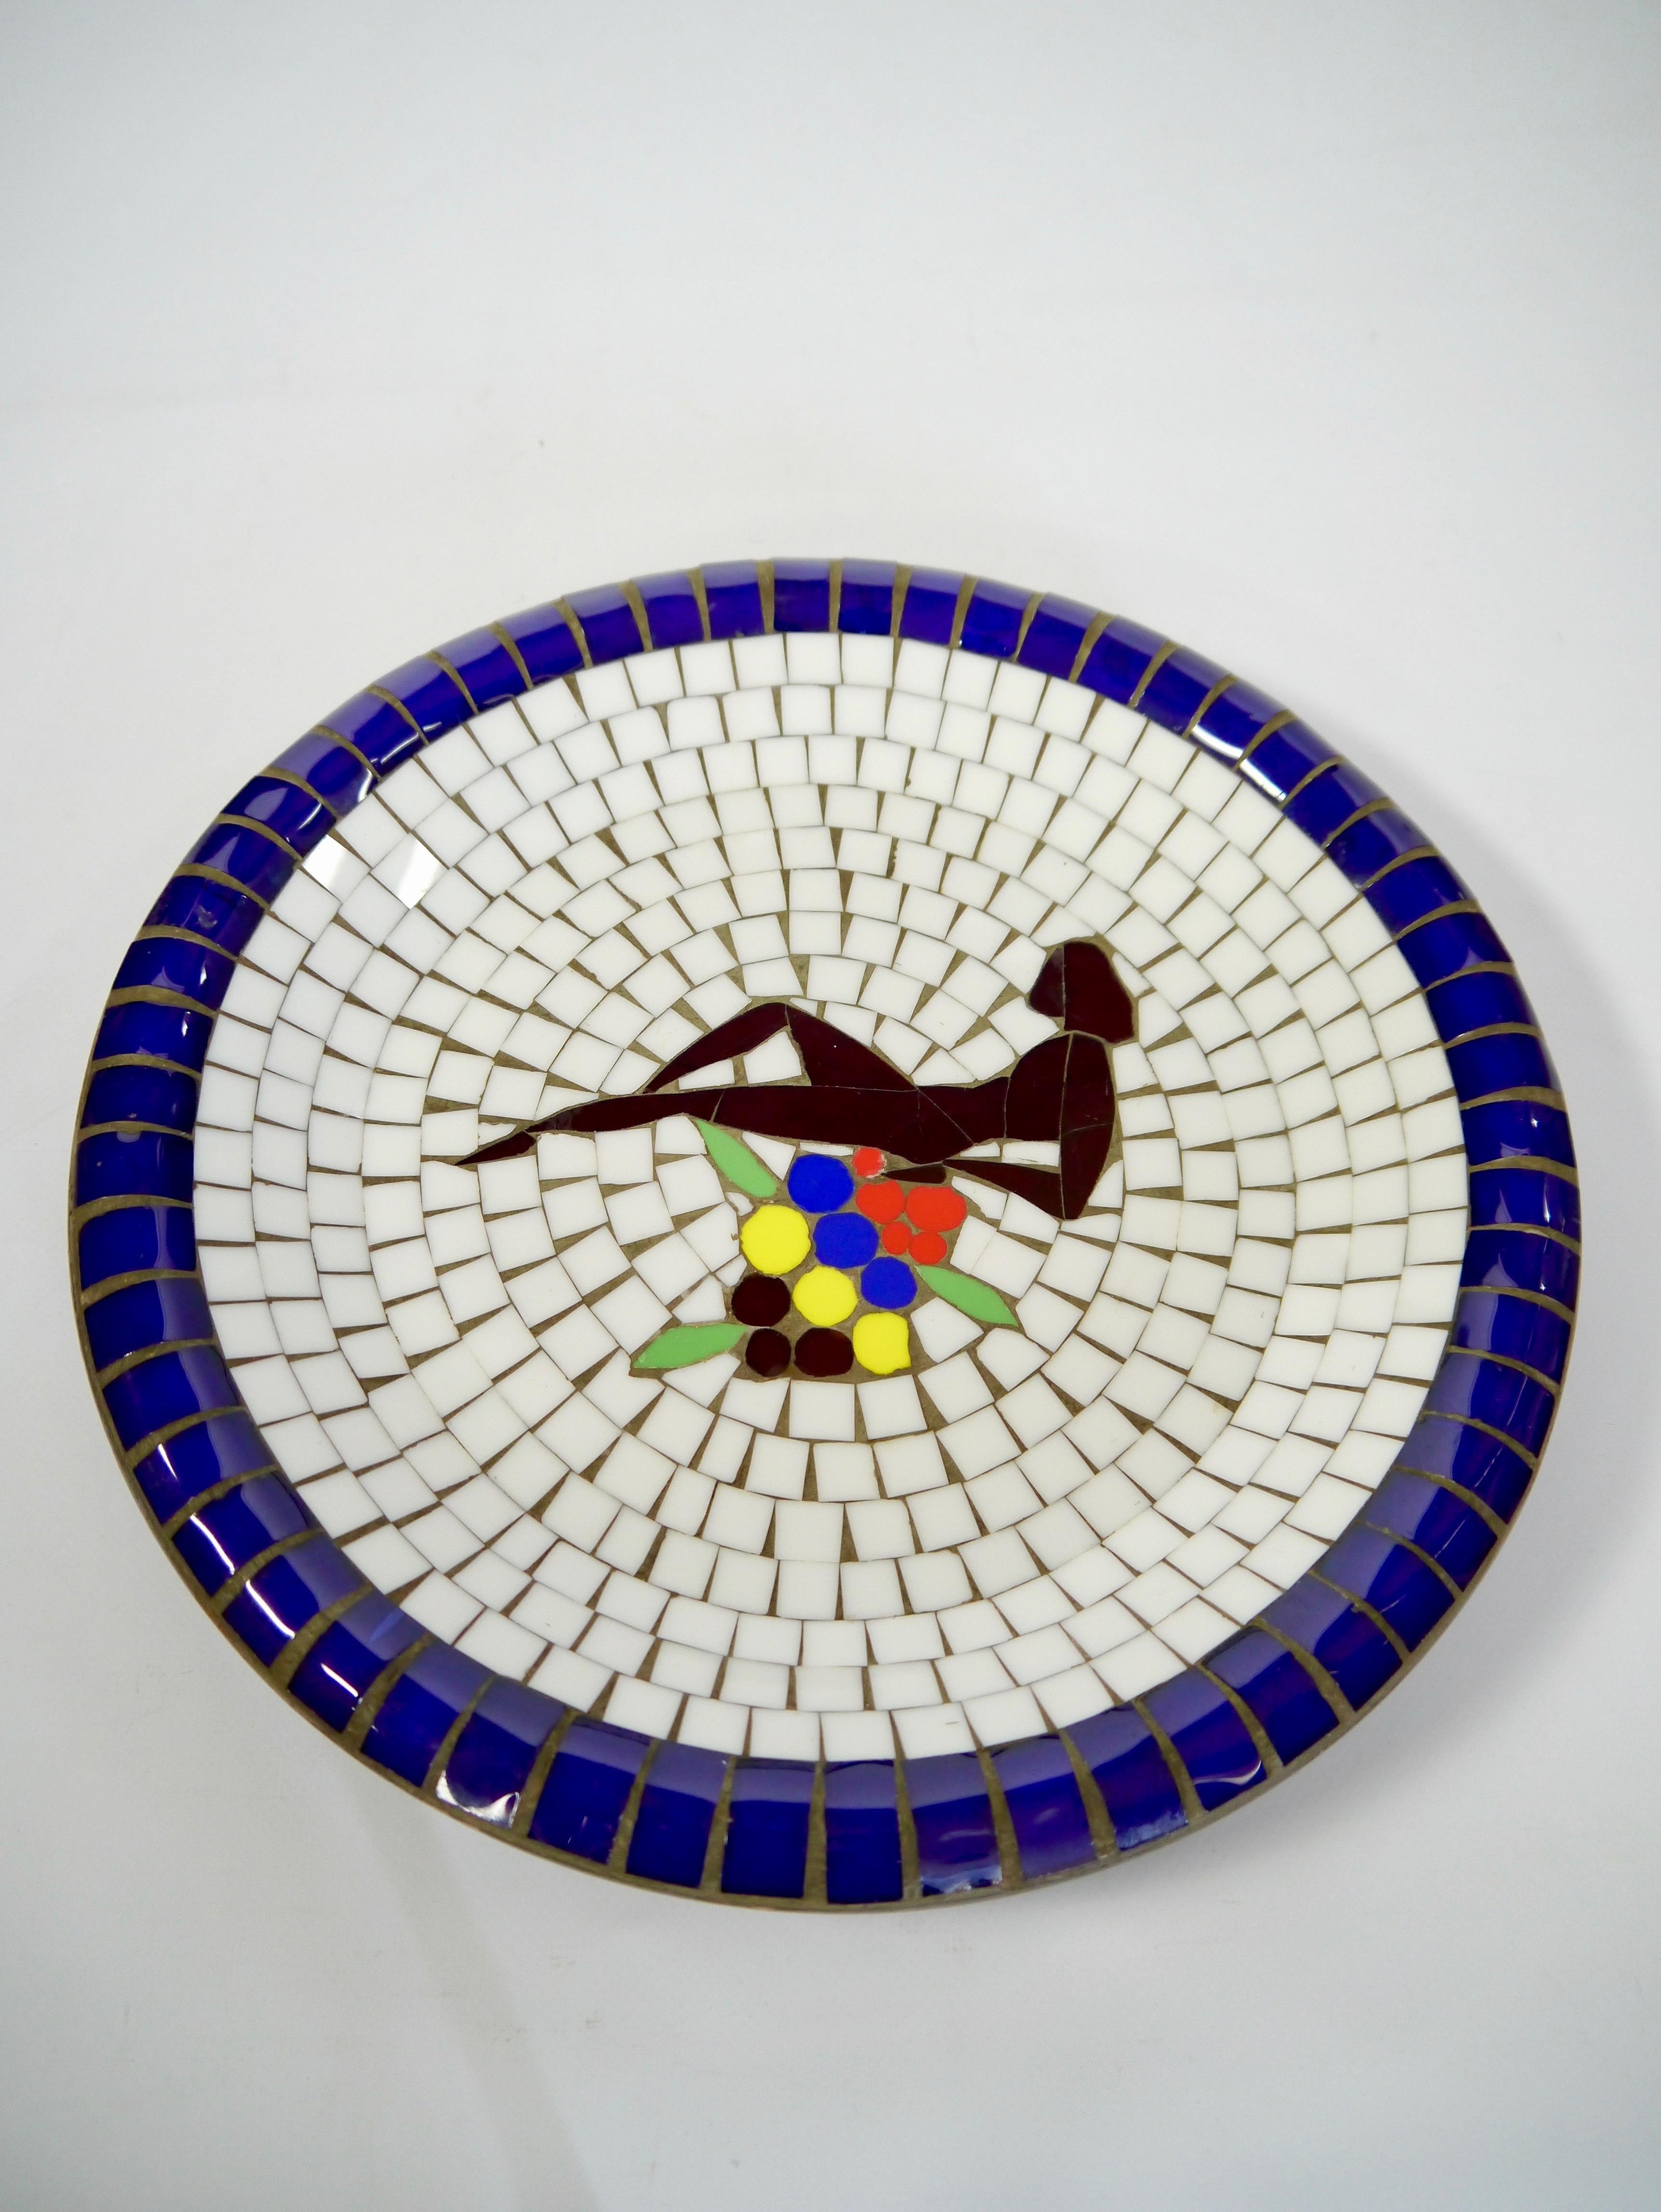 Stoneware bowl with ceramic tile mosaic, made by Atelier Bøjstrup in Denmark 1940s. Art deco / cubistic pattern and selection of primary color scheme.